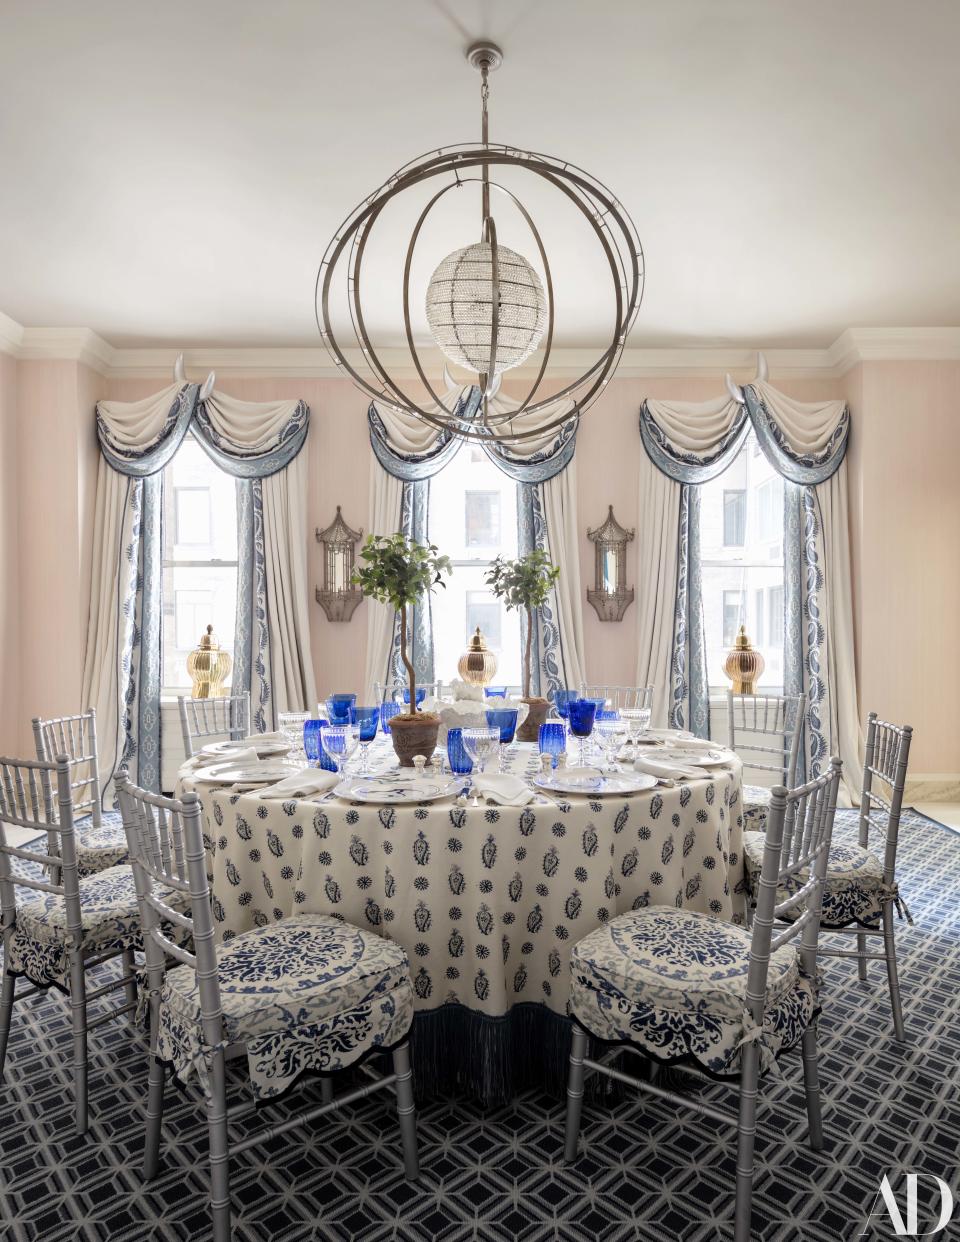 In the dining room, a hanging light from John Rosselli illuminates a table draped in a Brunschwig & Fils fabric. Curtains of a Lee Jofa linen; sconces from Liz O'Brien; rug by Stark.